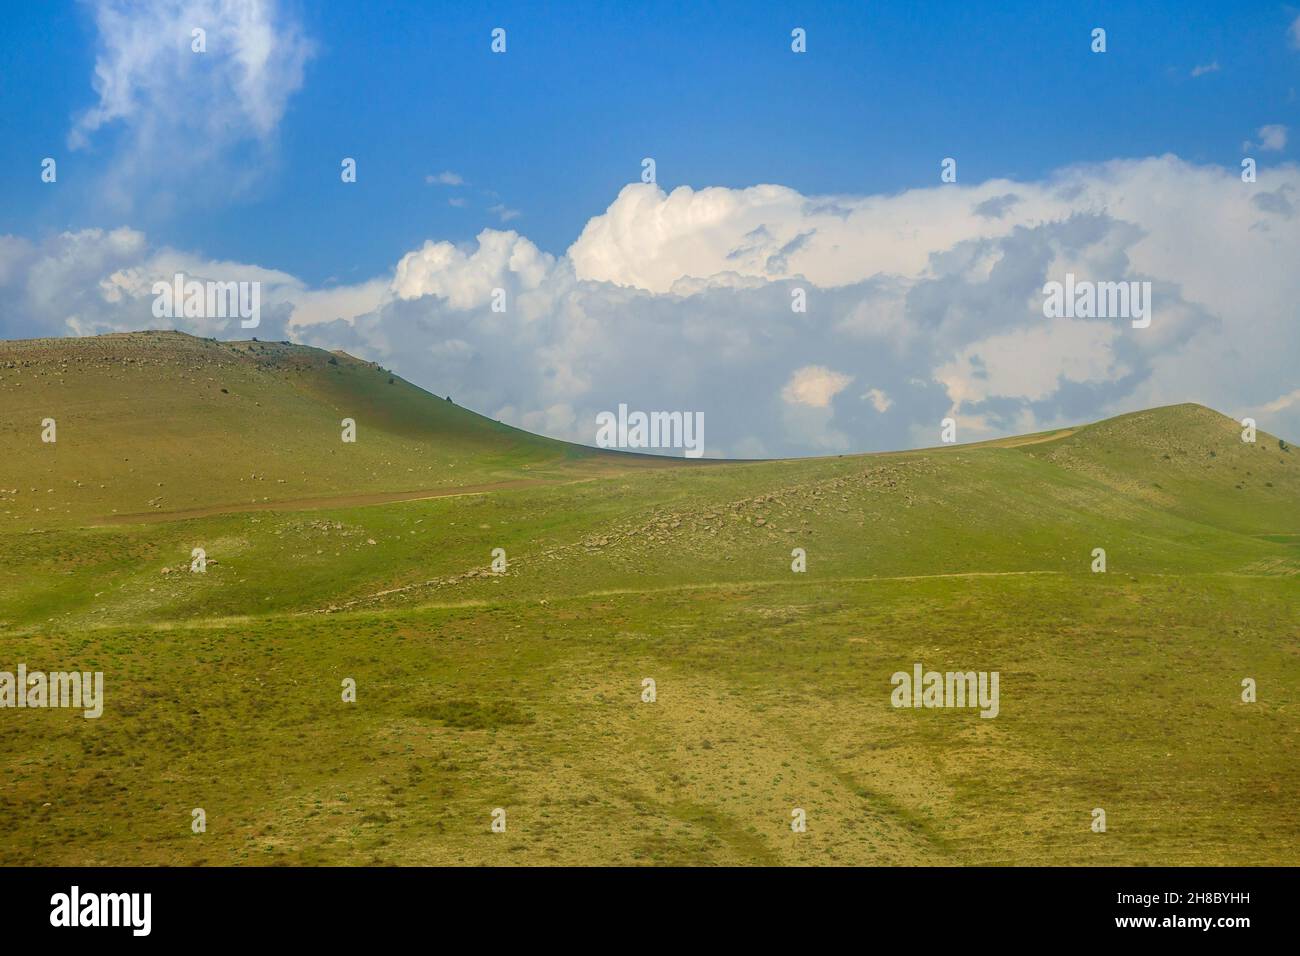 Scenic green hills, not yet burnt by the sun, against a blue cloudy sky. Shot in the Qashqadaryo region of Uzbekistan. Stock Photo